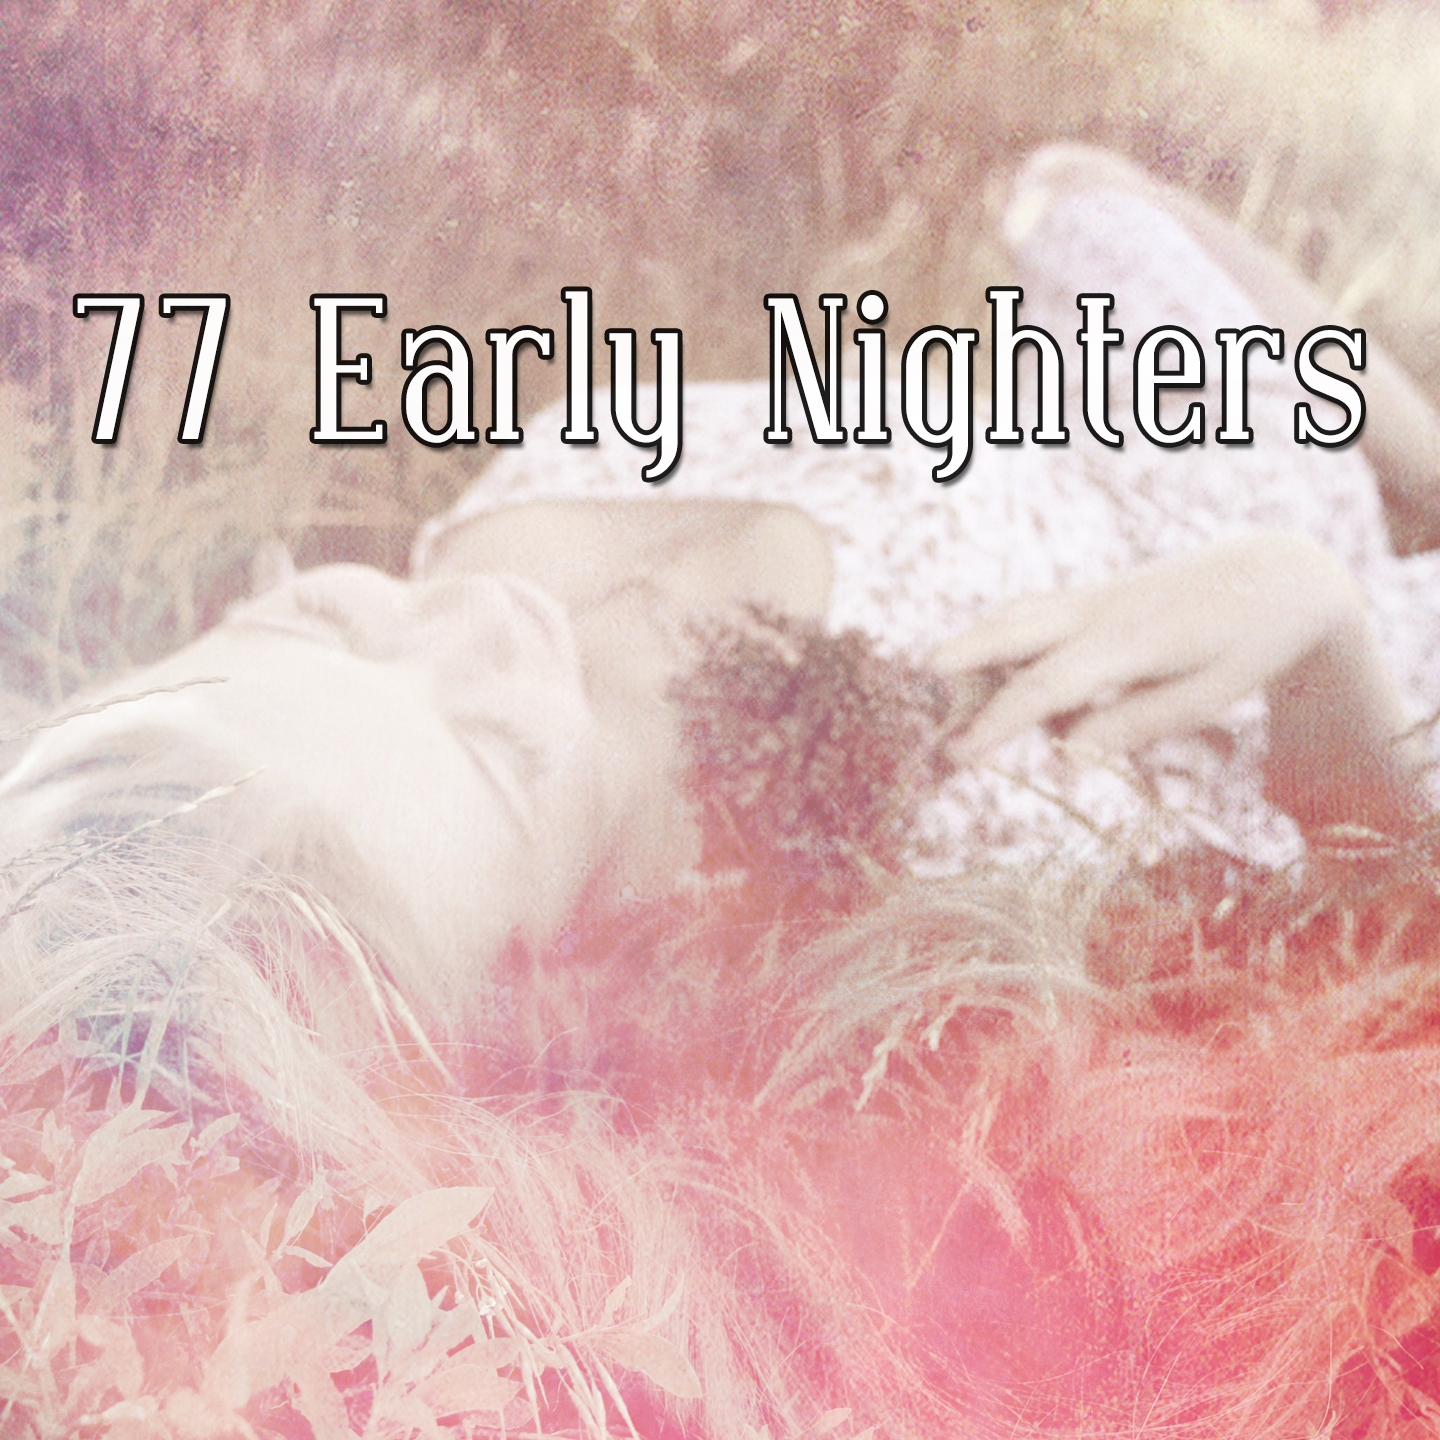 77 Early Nighters